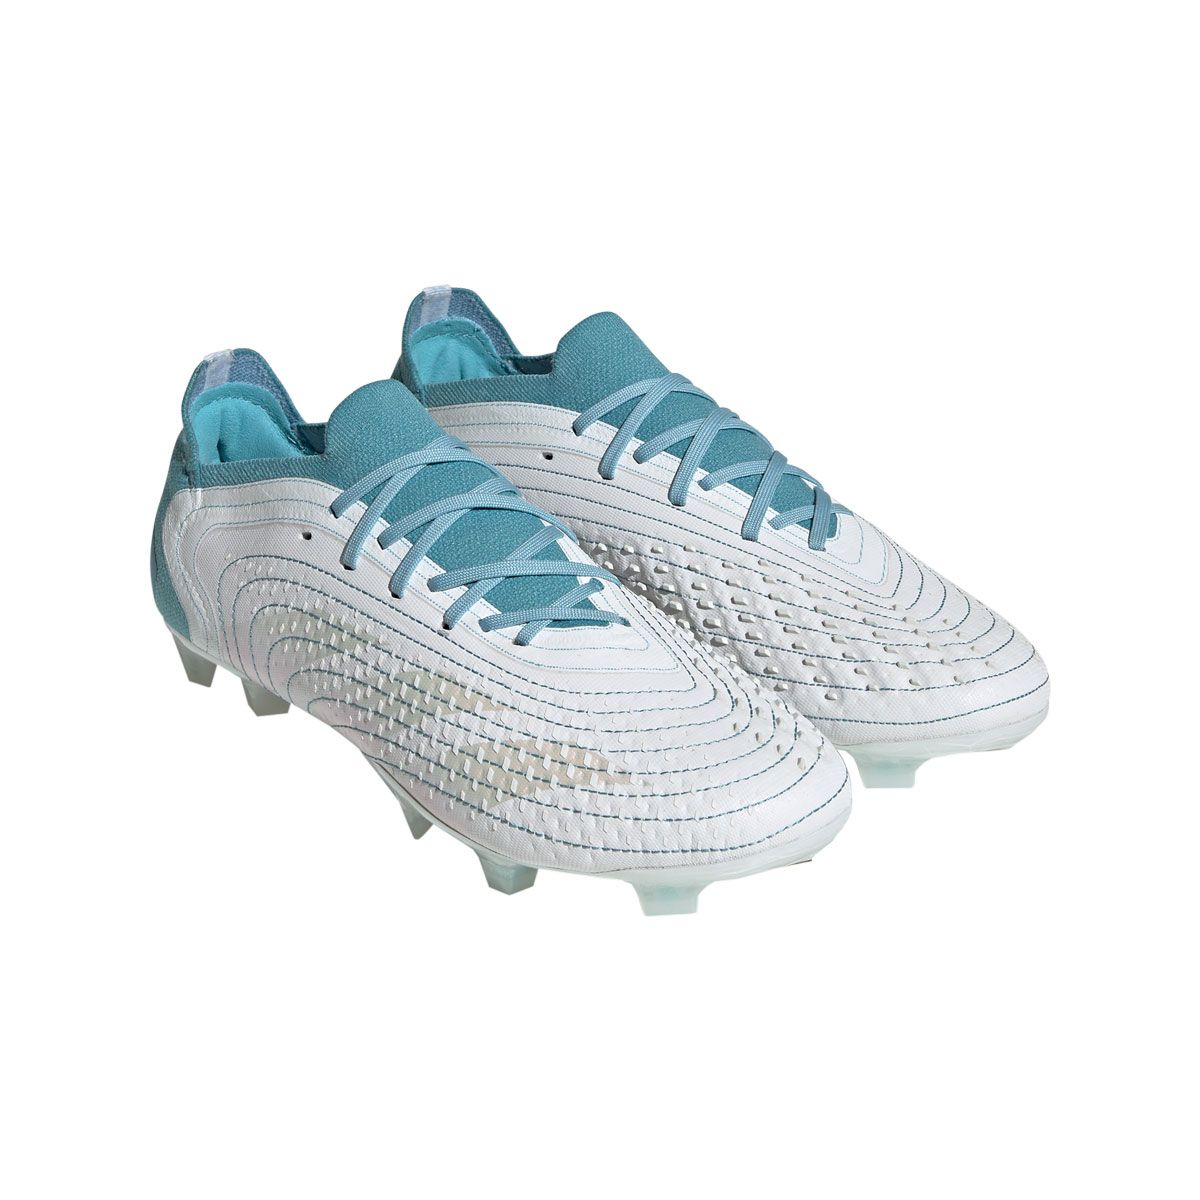 adidas Predator Accuracy.1 Low Collar FG Soccer Cleats | x Parley Pack ...